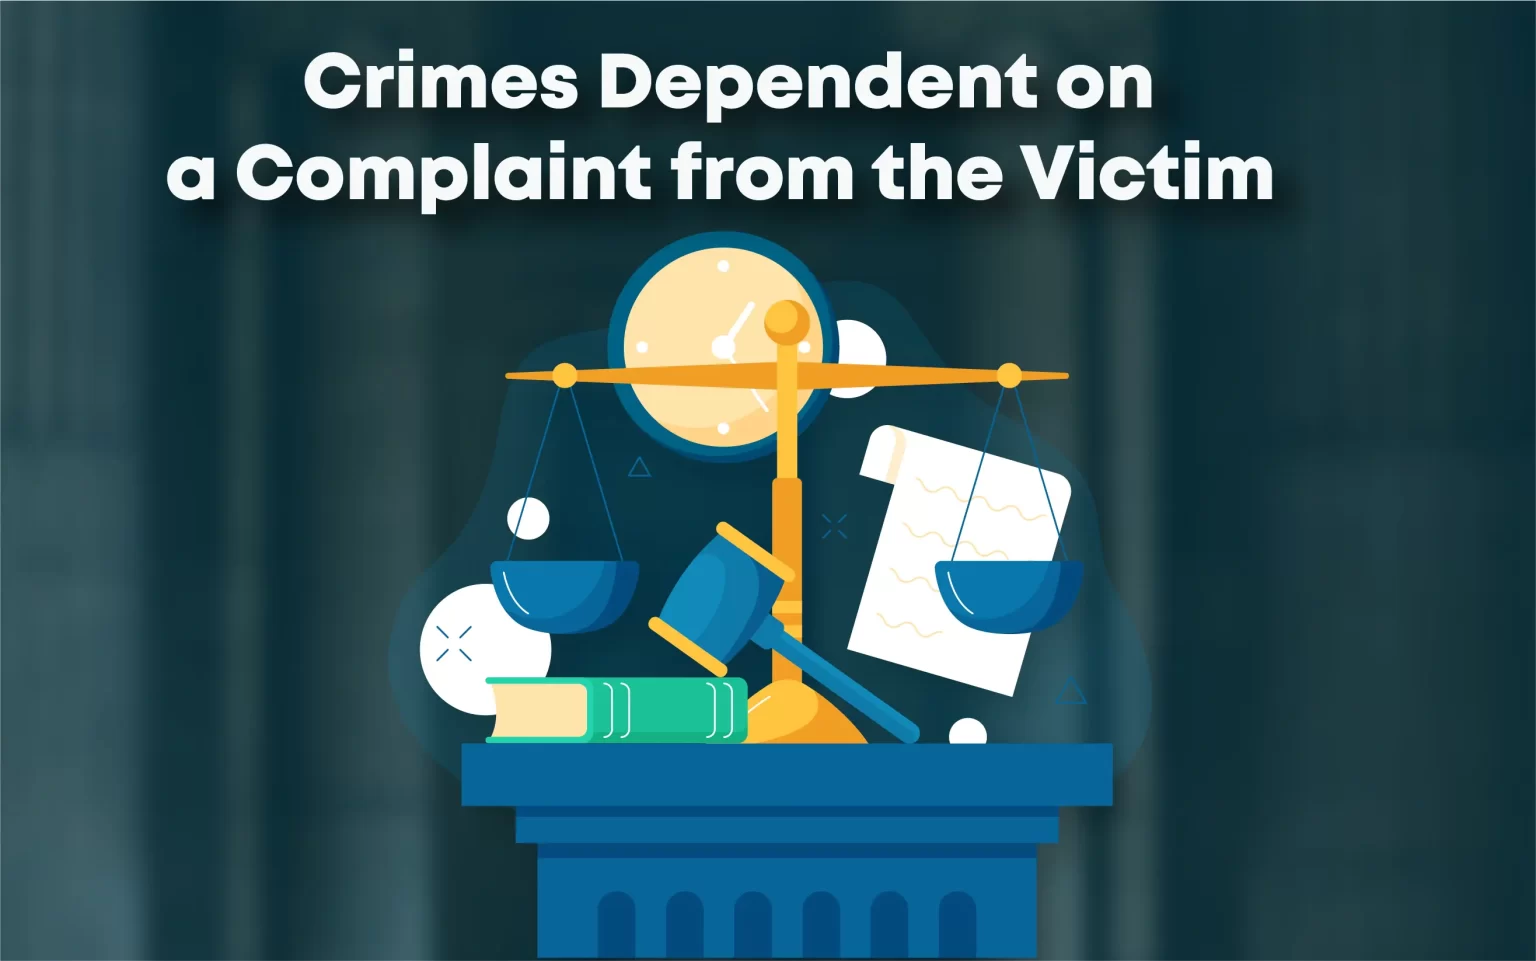 Exceptions in Initiating Criminal Proceedings: Crimes Requiring a Complaint from the Victim